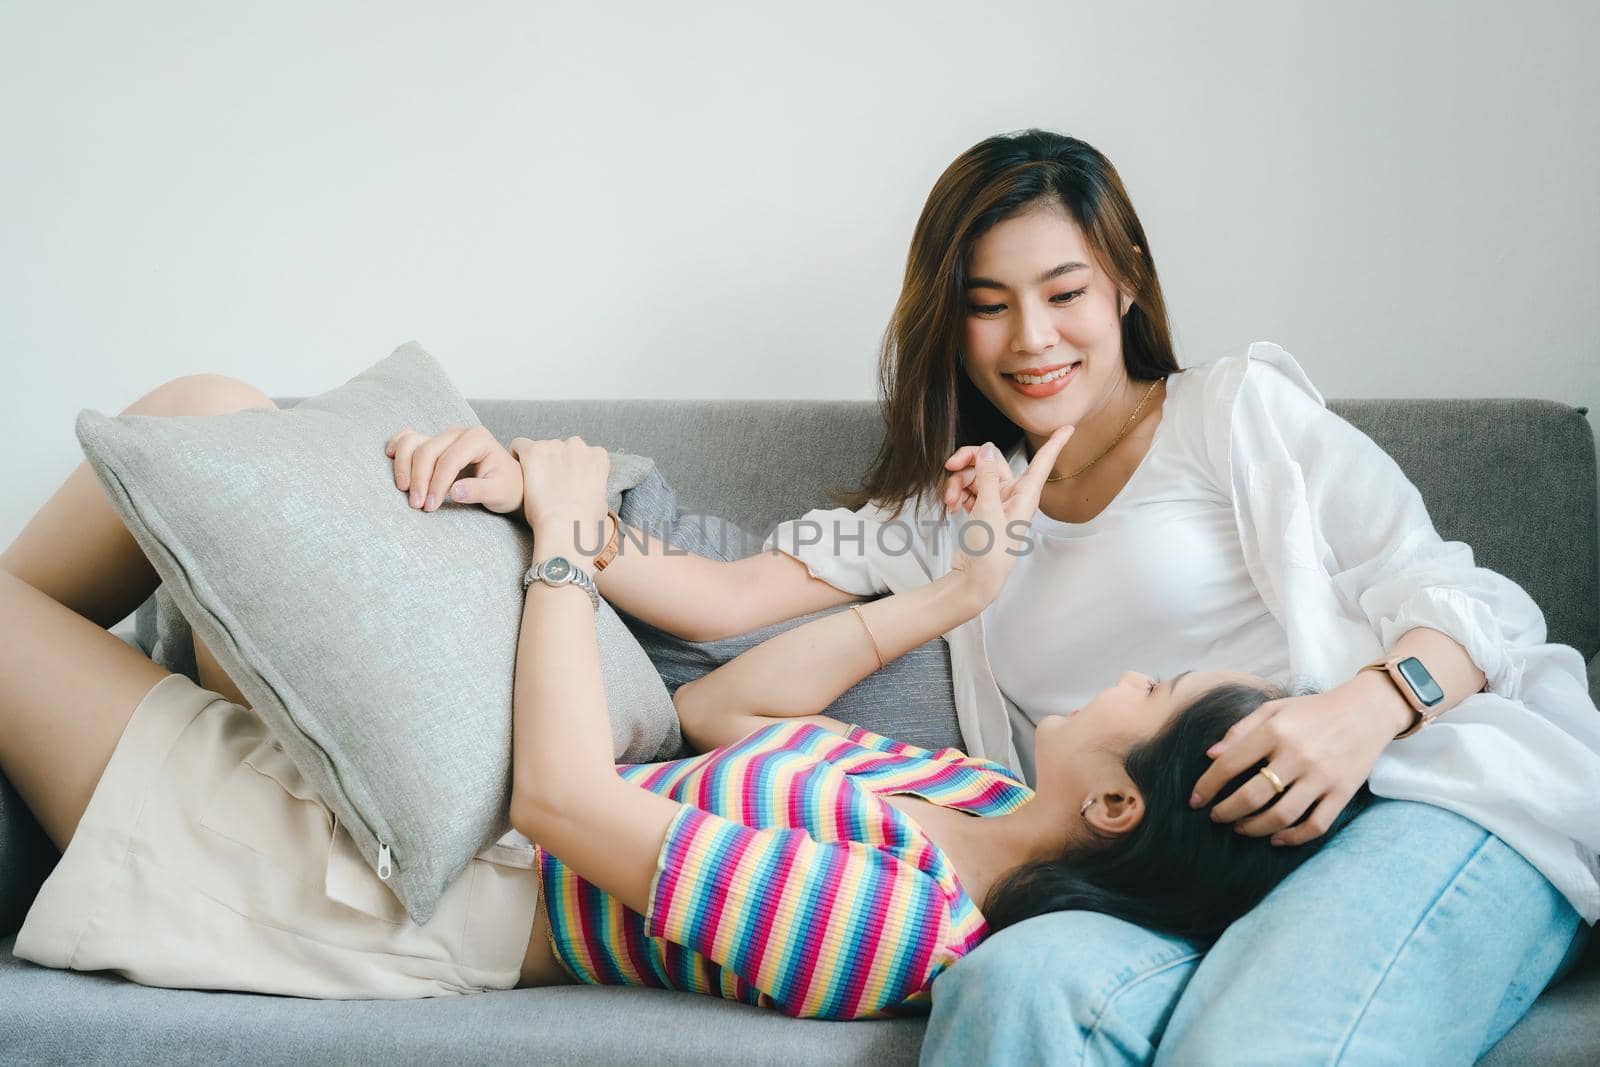 lgbtq, lgbt concept, homosexuality, portrait of two Asian women posing happy together and showing love for each other while being together by Manastrong